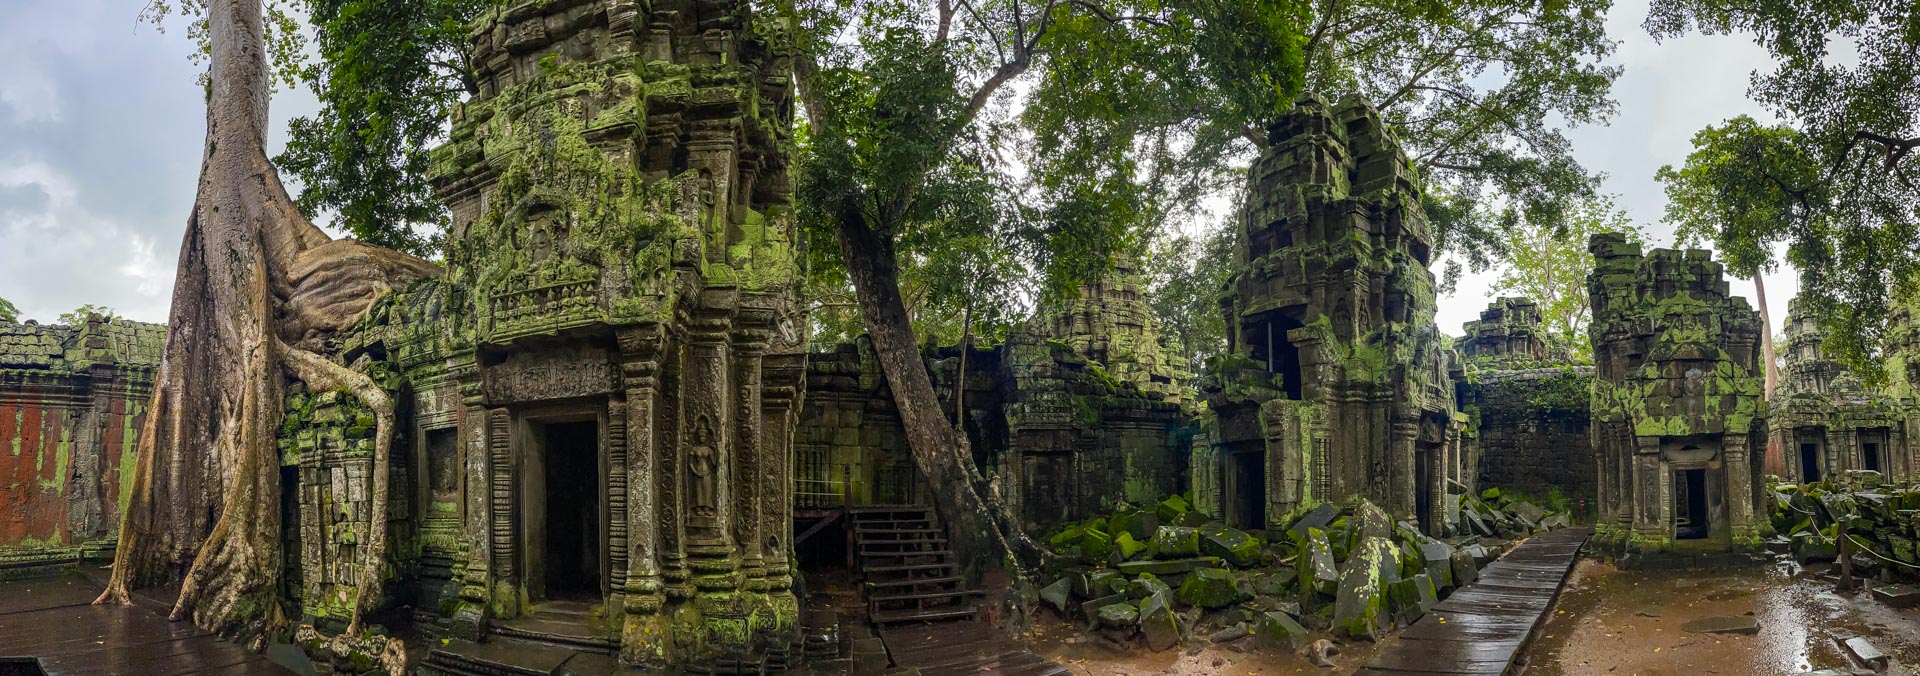 /fm/Files//Pictures/Ido Uploads/Asia/cambodia/All/Angkor Wat - Inside Temple and Trees View - PN.jpg